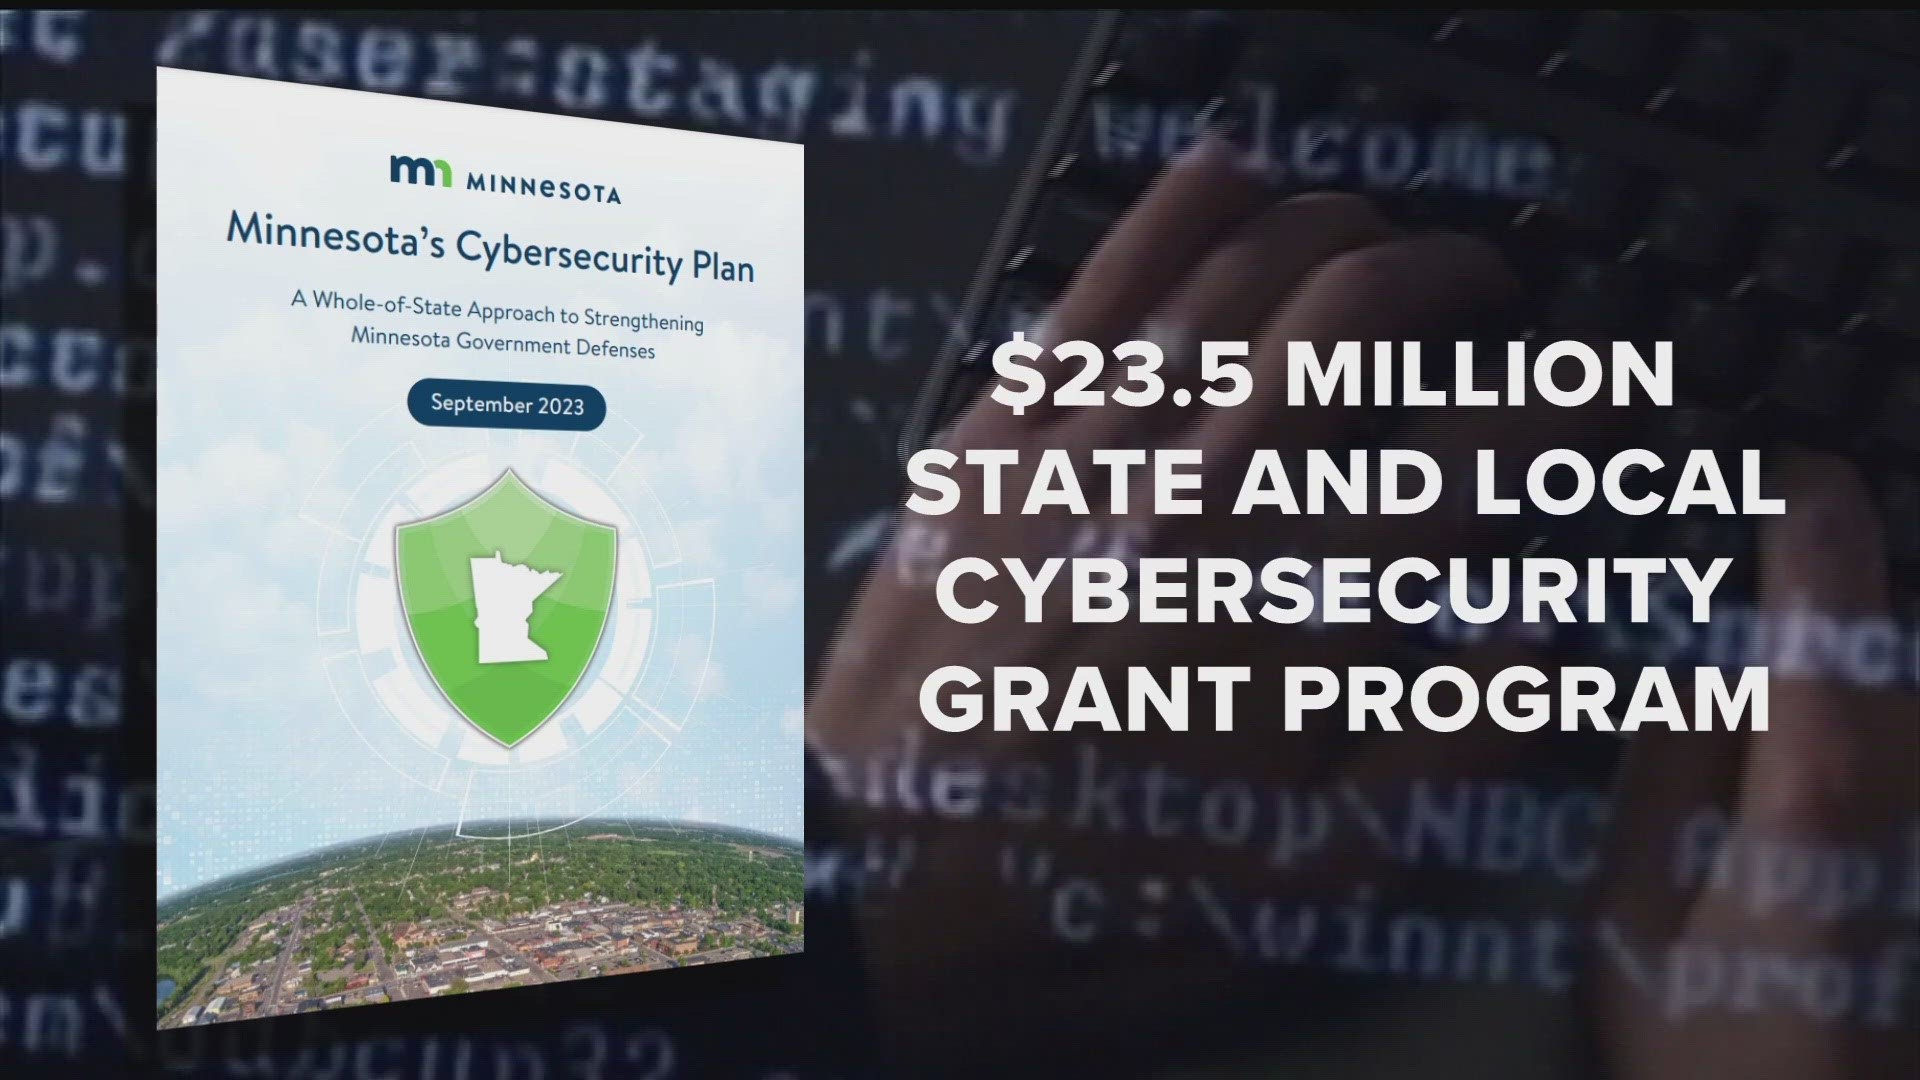 The news comes as Minnesota lawmakers launched a new cybersecurity funding plan Tuesday, which is meant to help schools, cities and counties protect themselves.